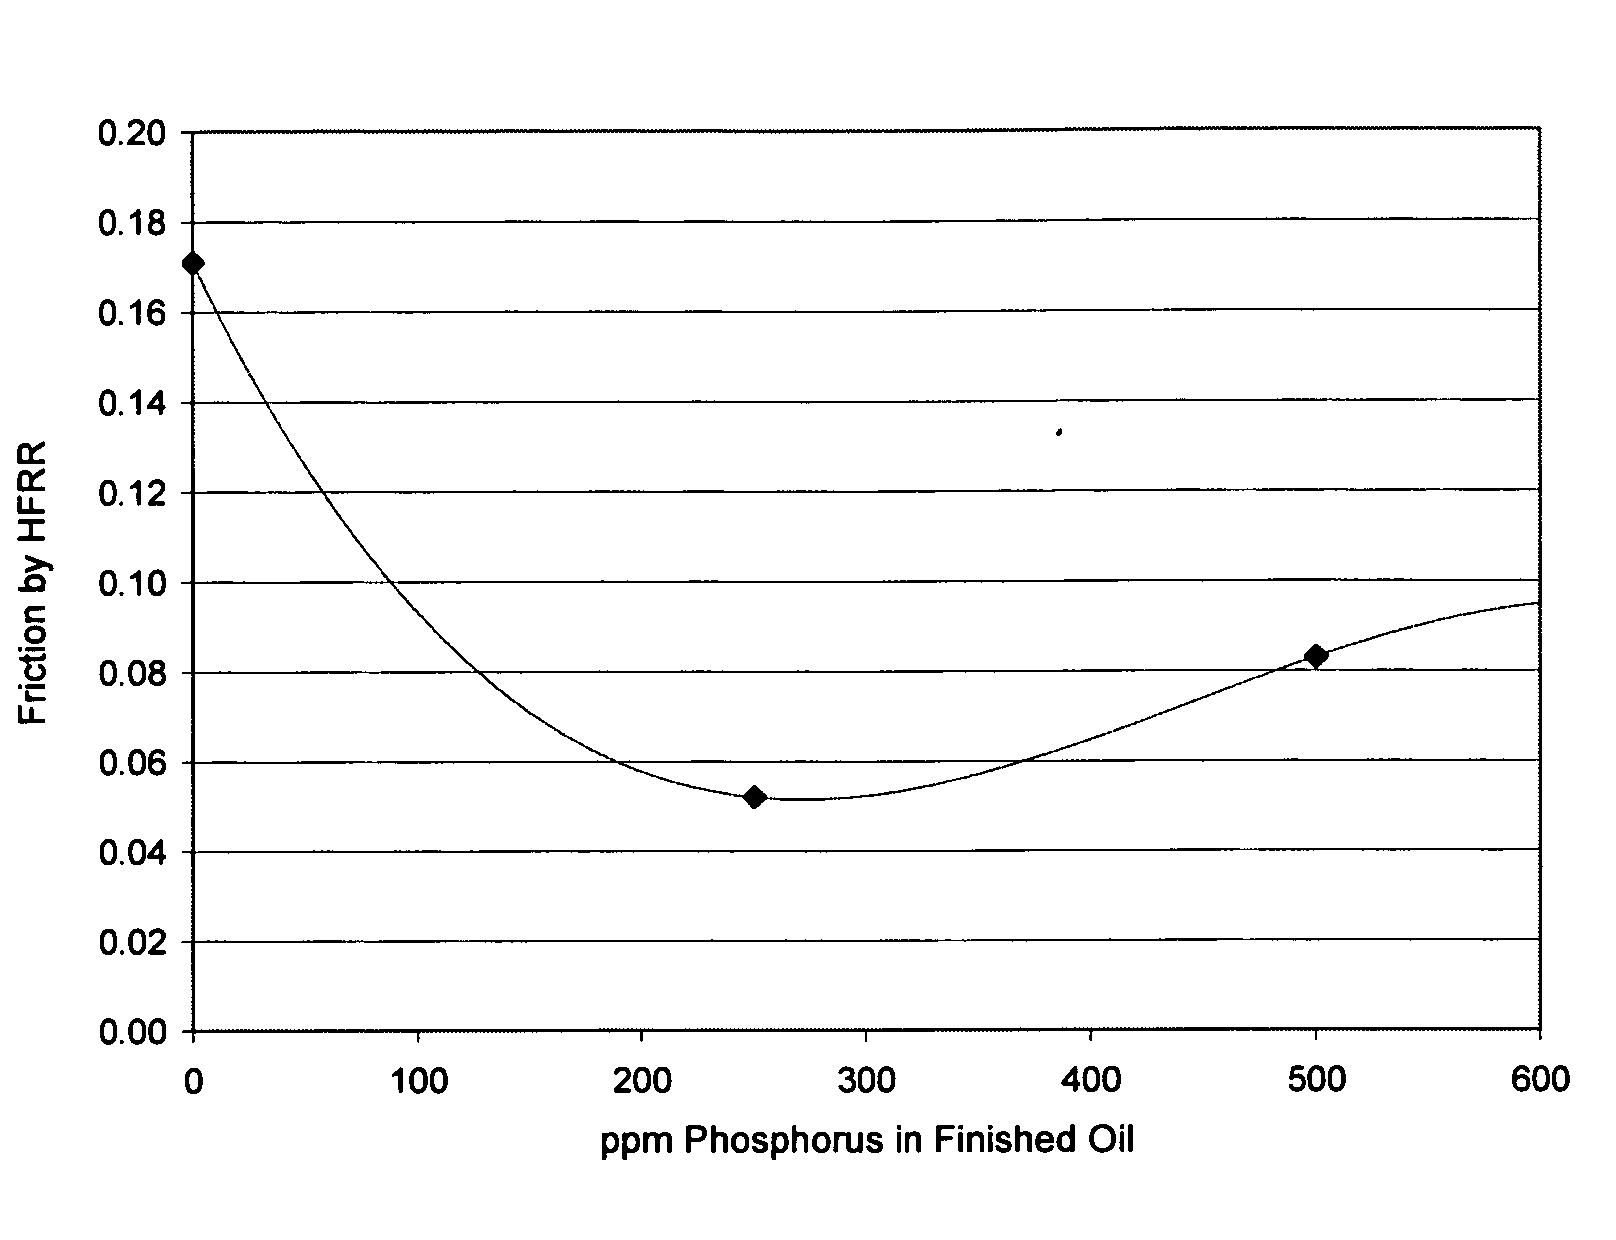 Lubricating oil compositions comprising a molybdenum compound and a zinc dialkyldithiophosphate